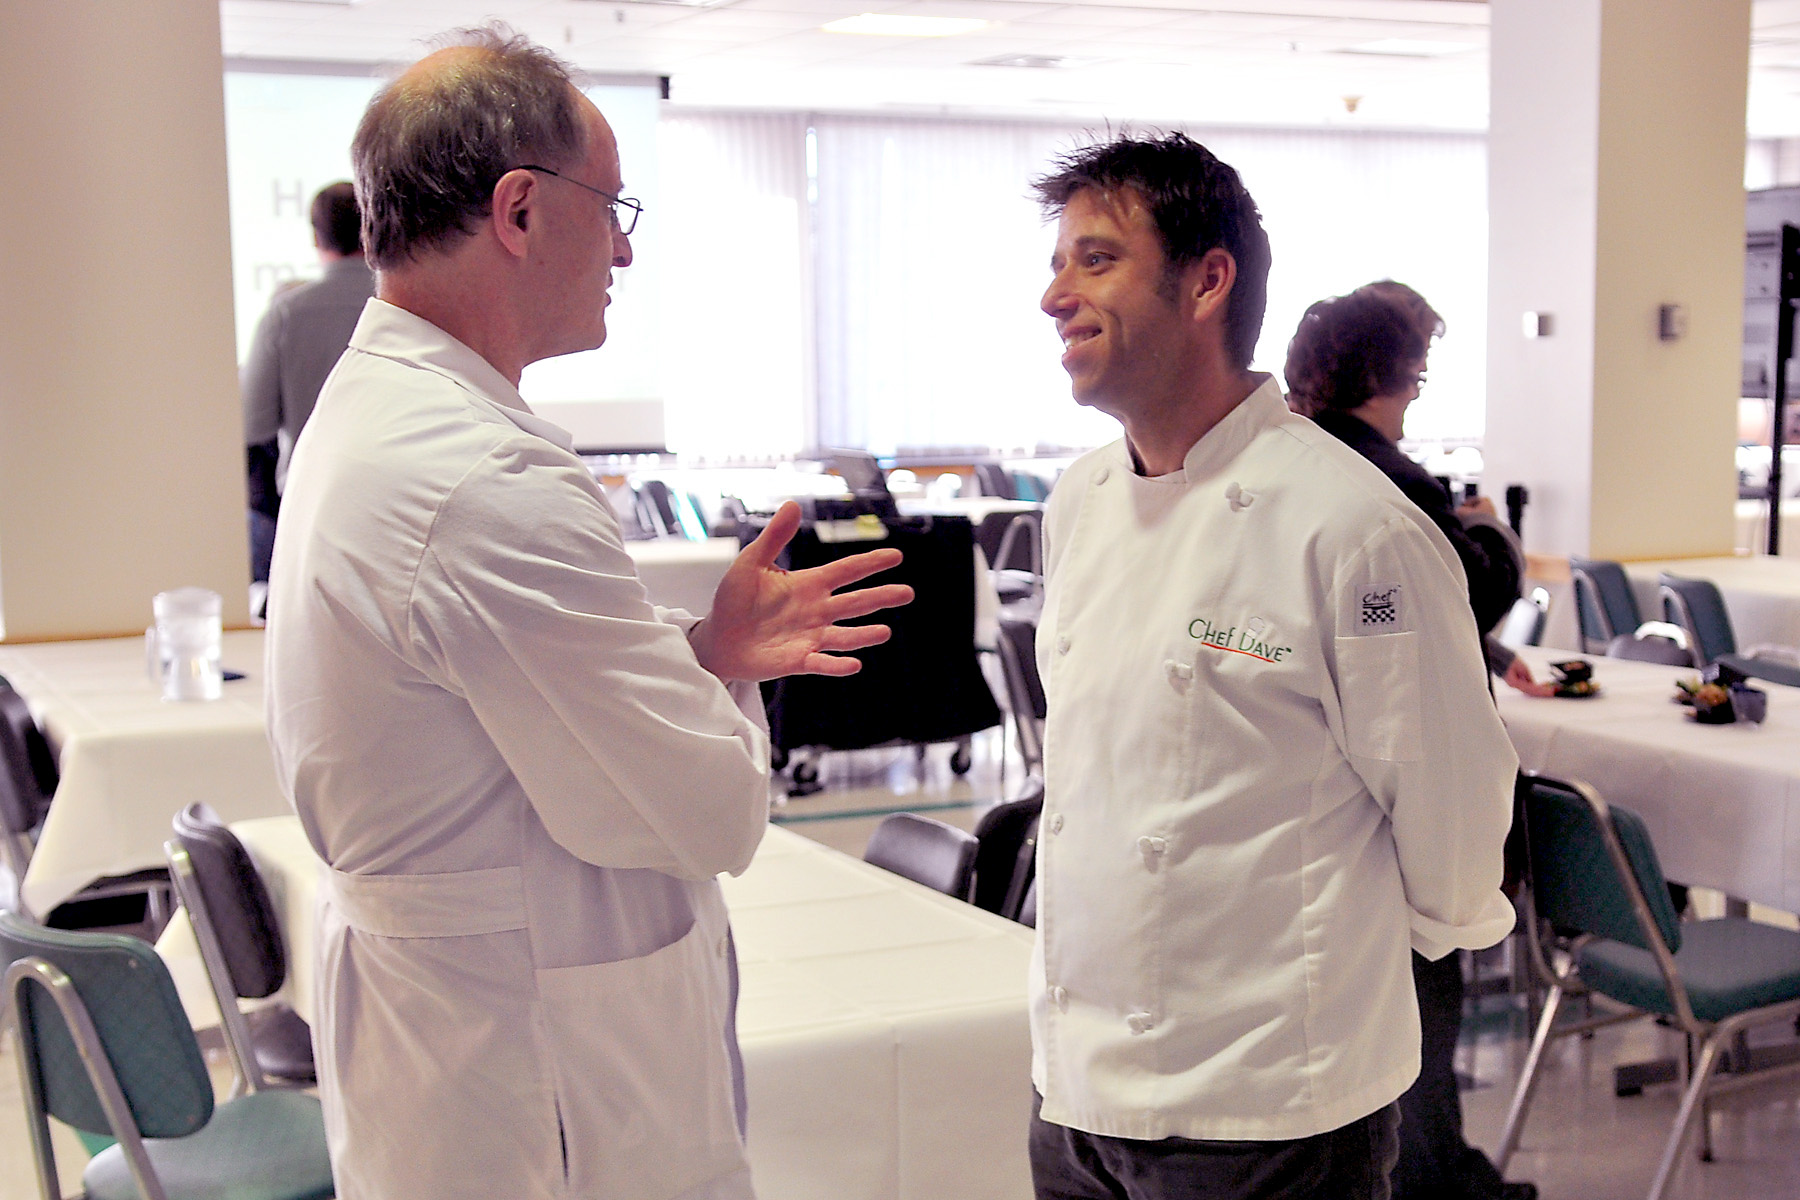 Surgeon Howard Simon MD, left, talks with Chef Dave Fouts. Photo by Debbie Rexine.